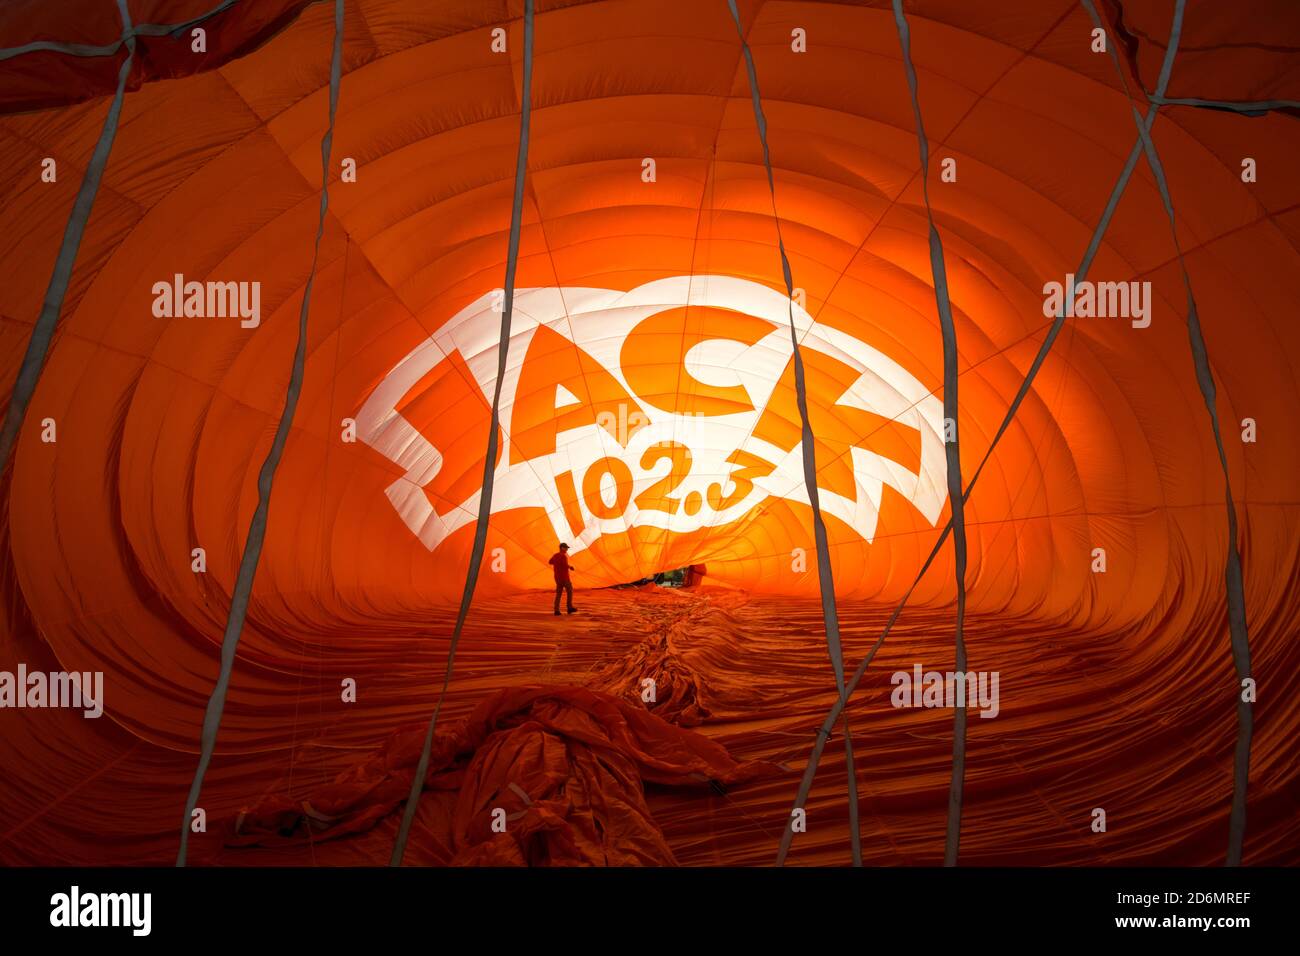 A hot air balloon in London Ontario being blown up with Jack 102.3 written on it Stock Photo